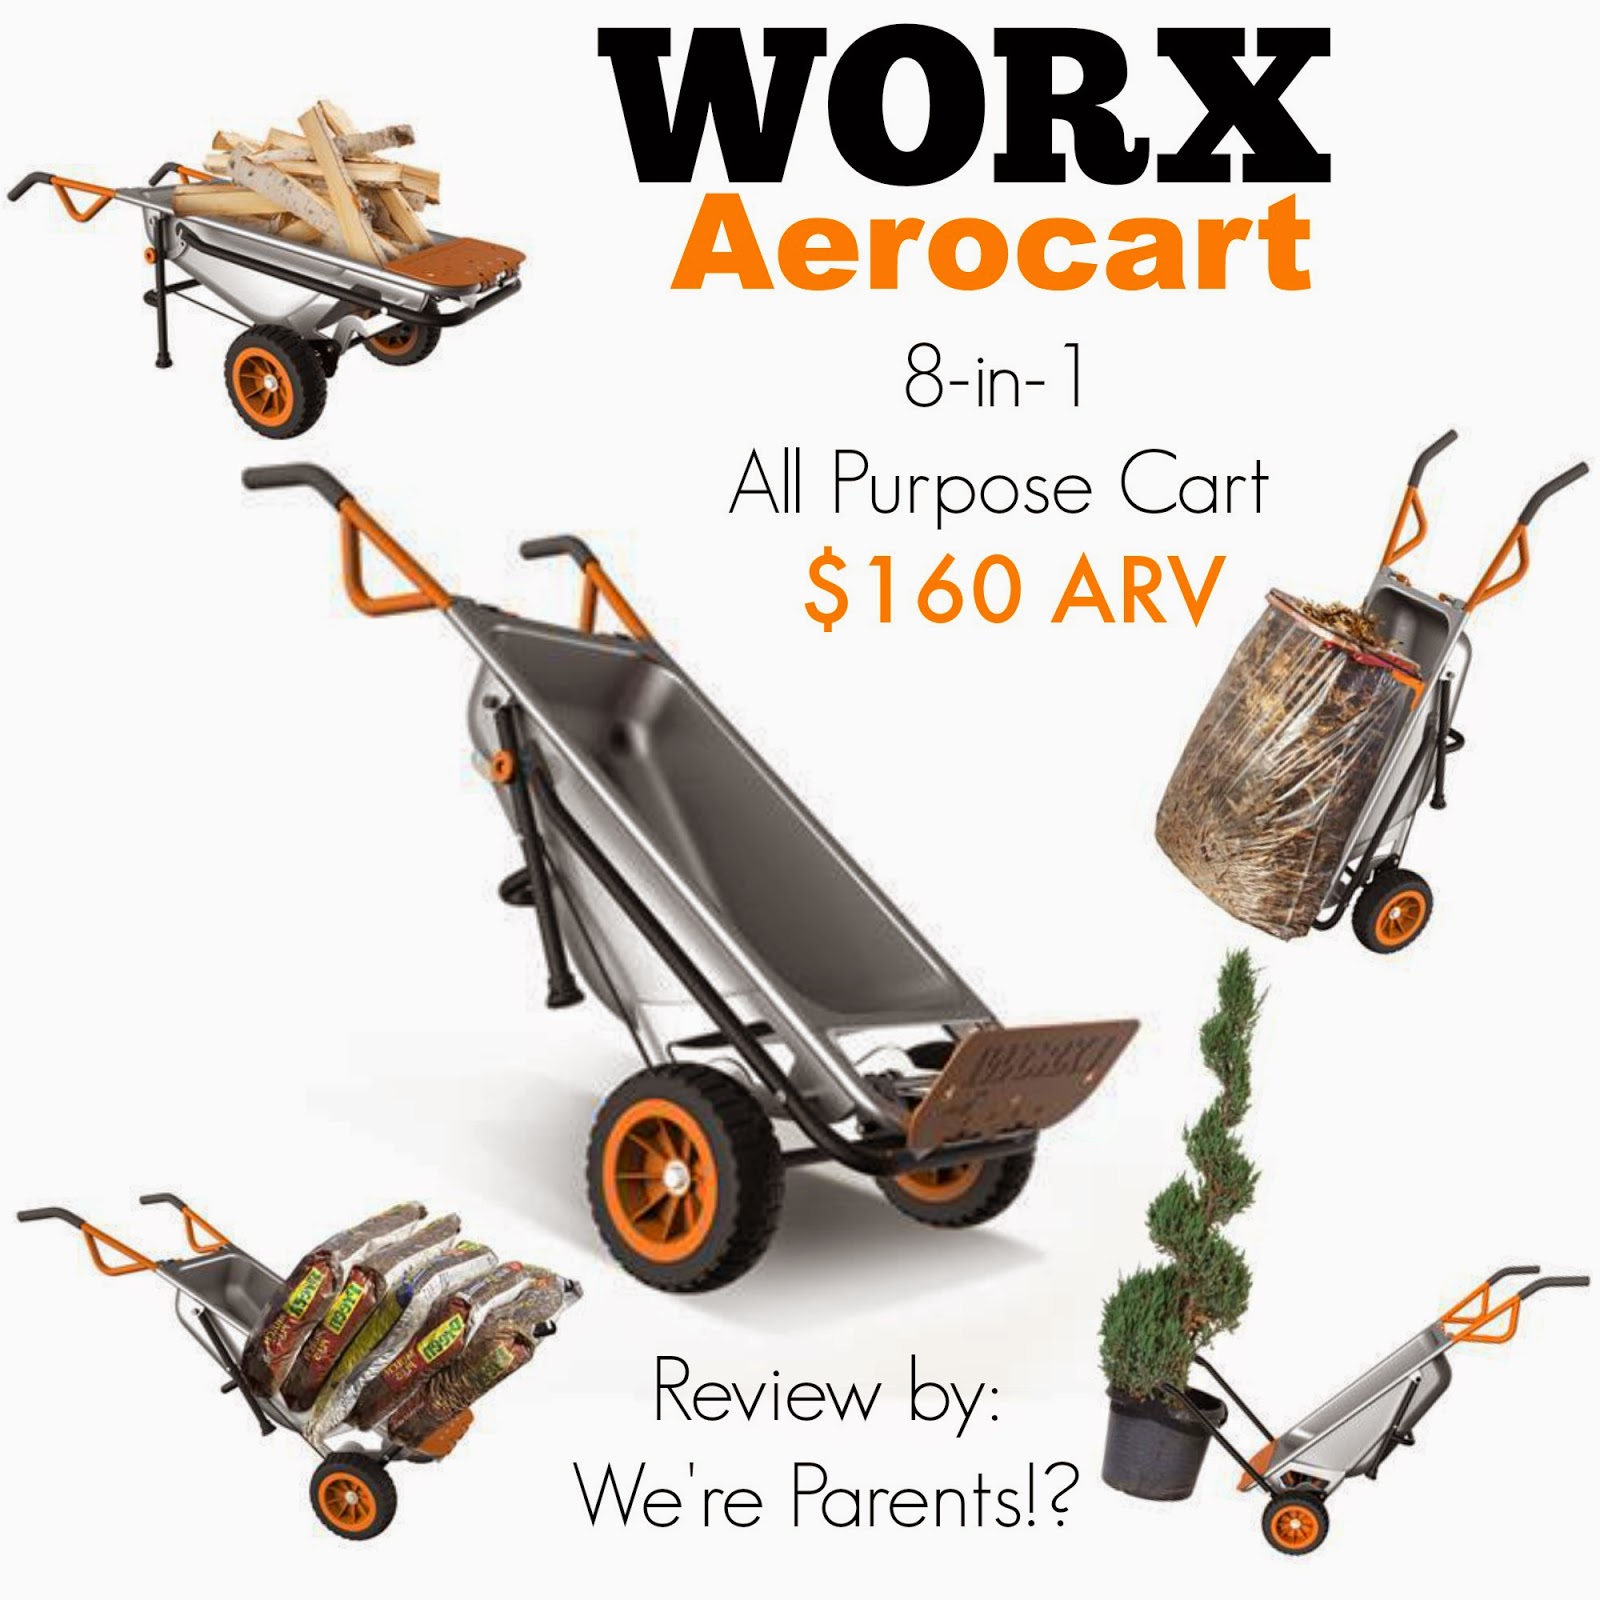 WORX Aerocart 8-in-1 Ultimate Cart Giveaway 10/20 US ~ Tales From A